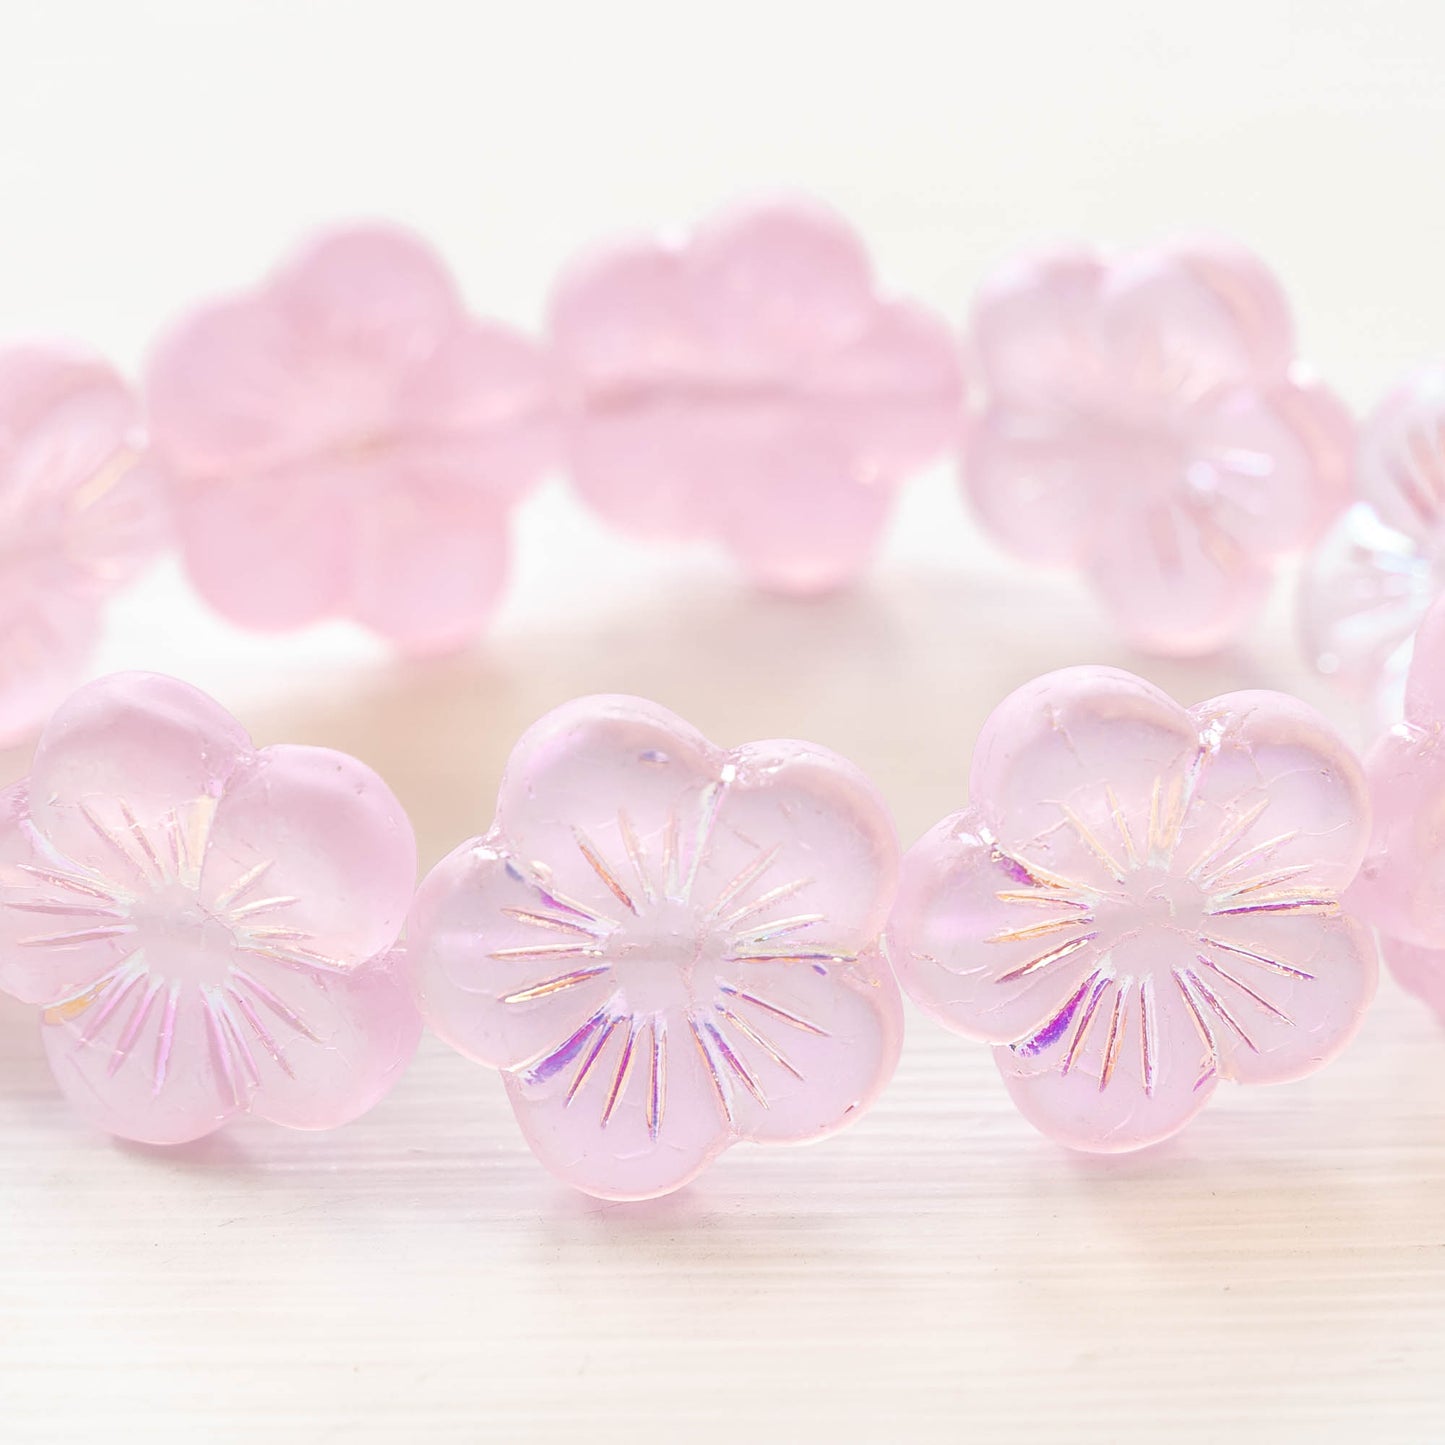 20mm Hibiscus Flower Beads - Matte Pink AB - 10 Beads